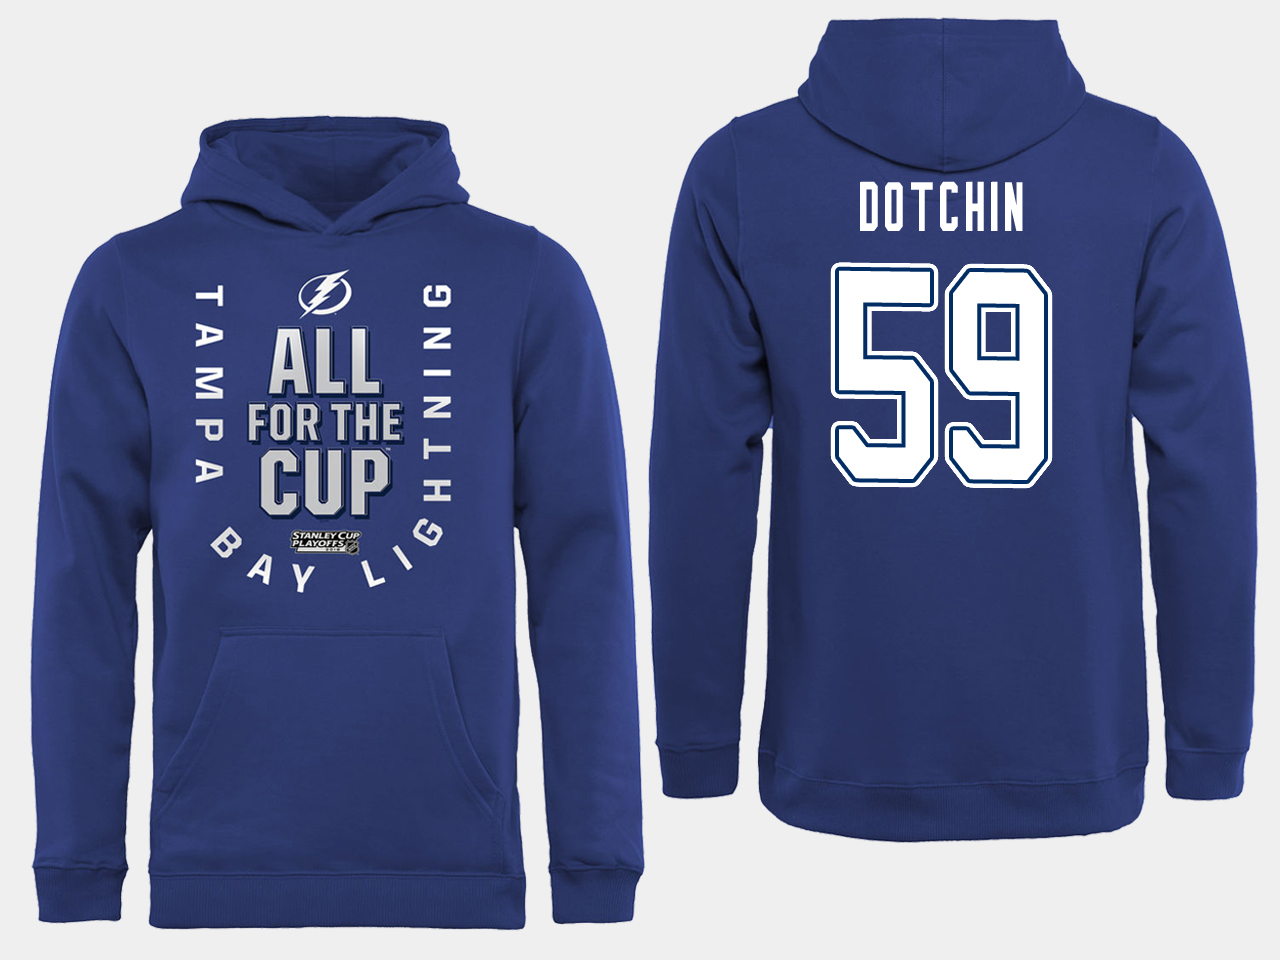 NHL Men adidas Tampa Bay Lightning #59 Dotchin blue All for the Cup Hoodie